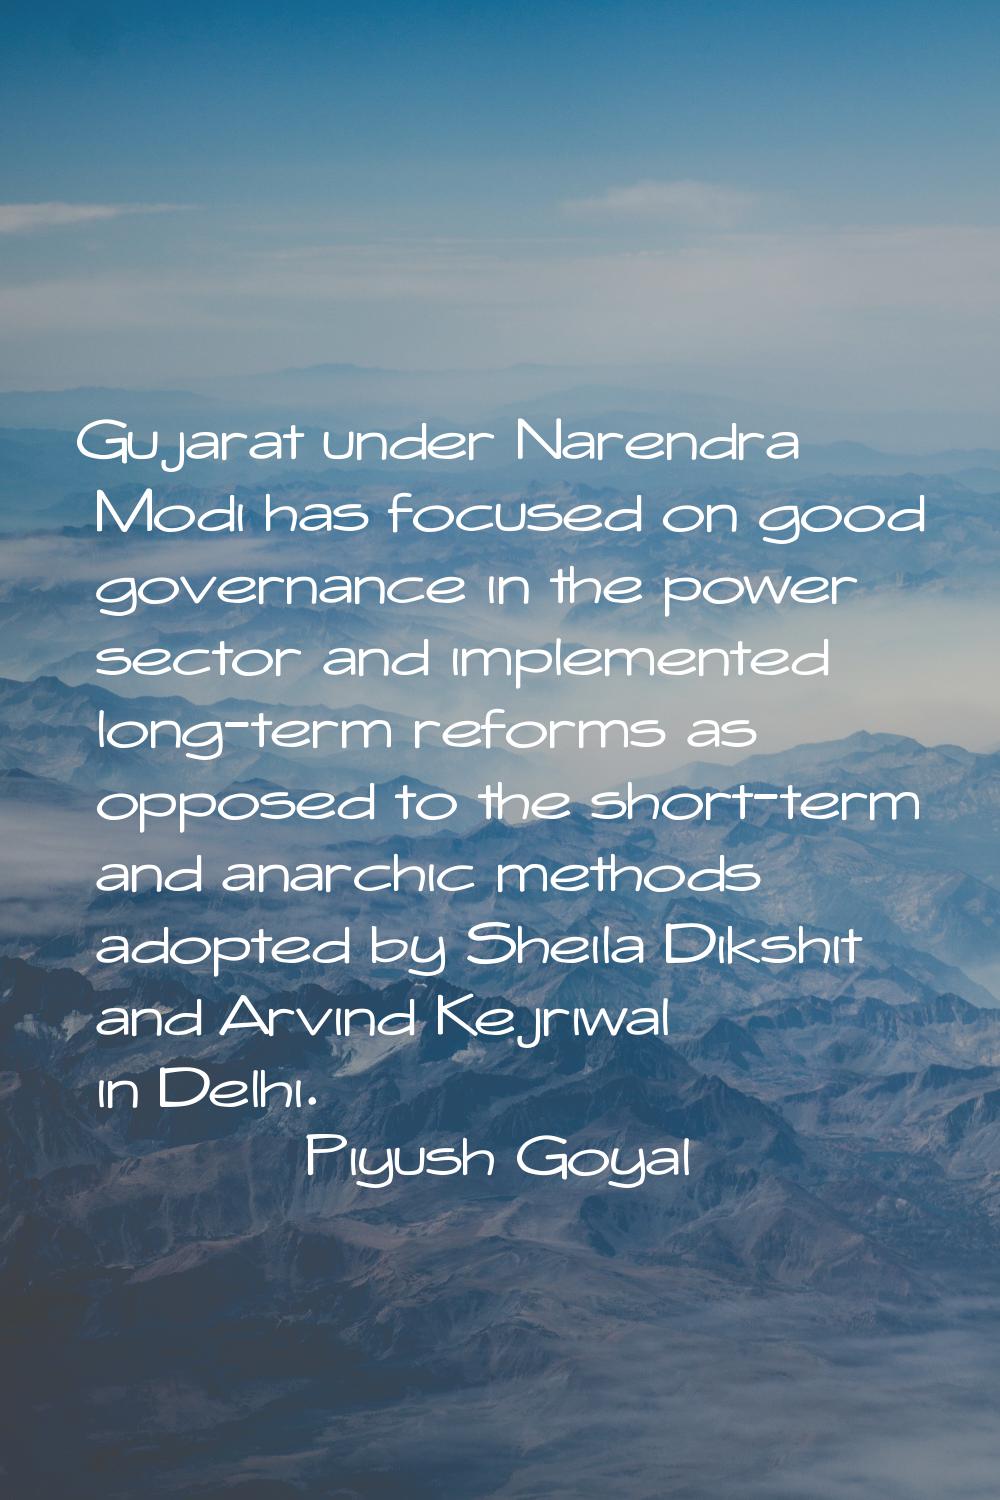 Gujarat under Narendra Modi has focused on good governance in the power sector and implemented long